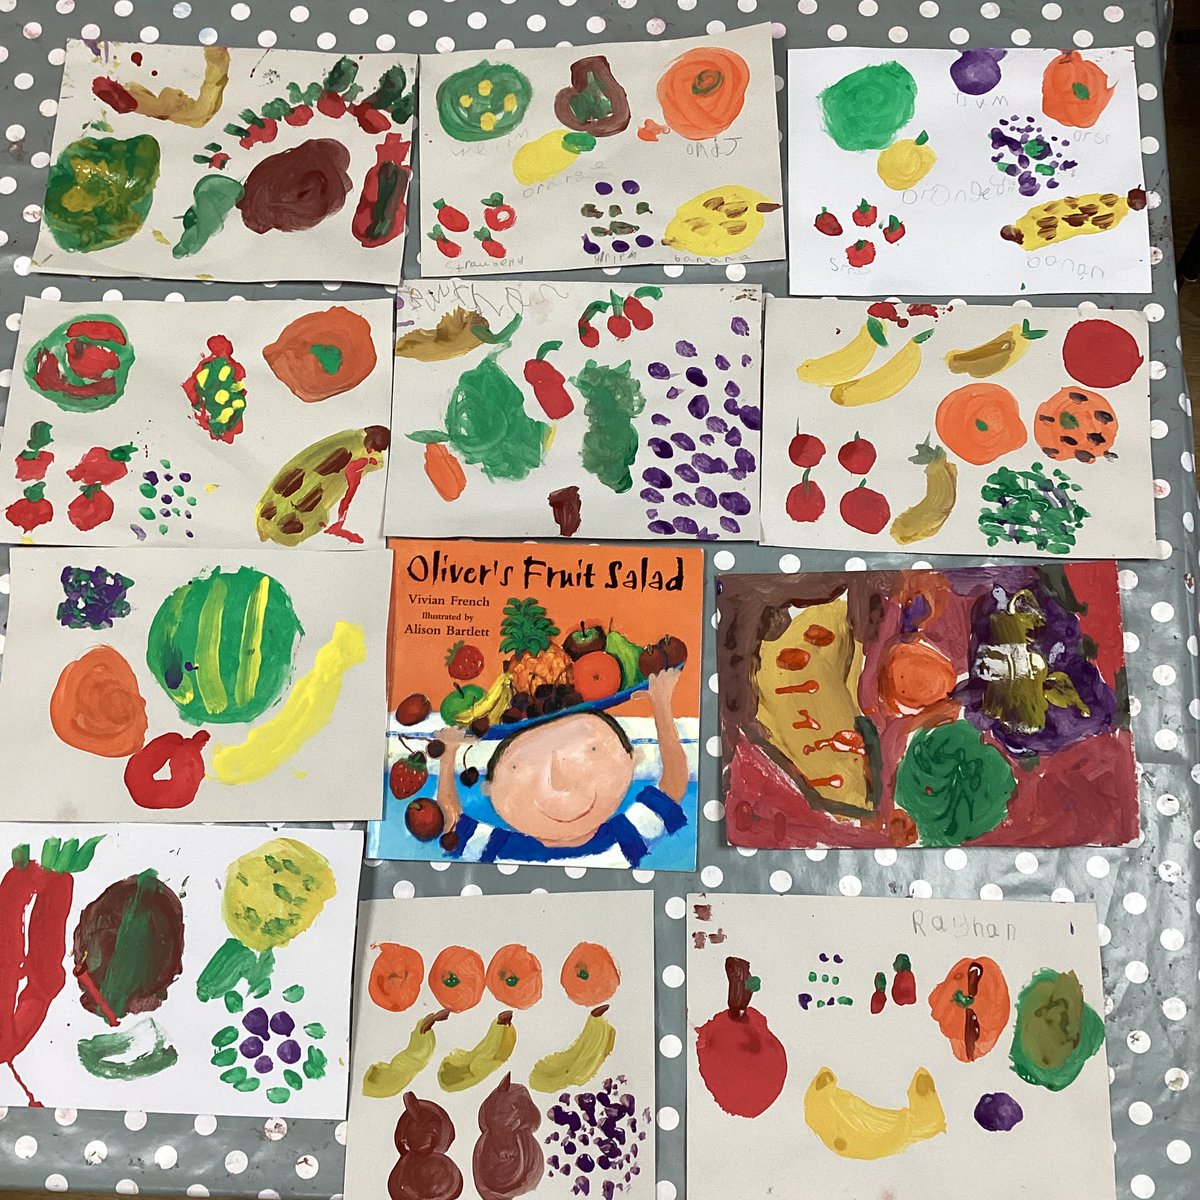 Reception are reading “Oliver’s Fruit Salad” by Vivian French this week. We love their observational fruity paintings! @fivekingdoms #youngartists #inspiredtowrite #welovefruit